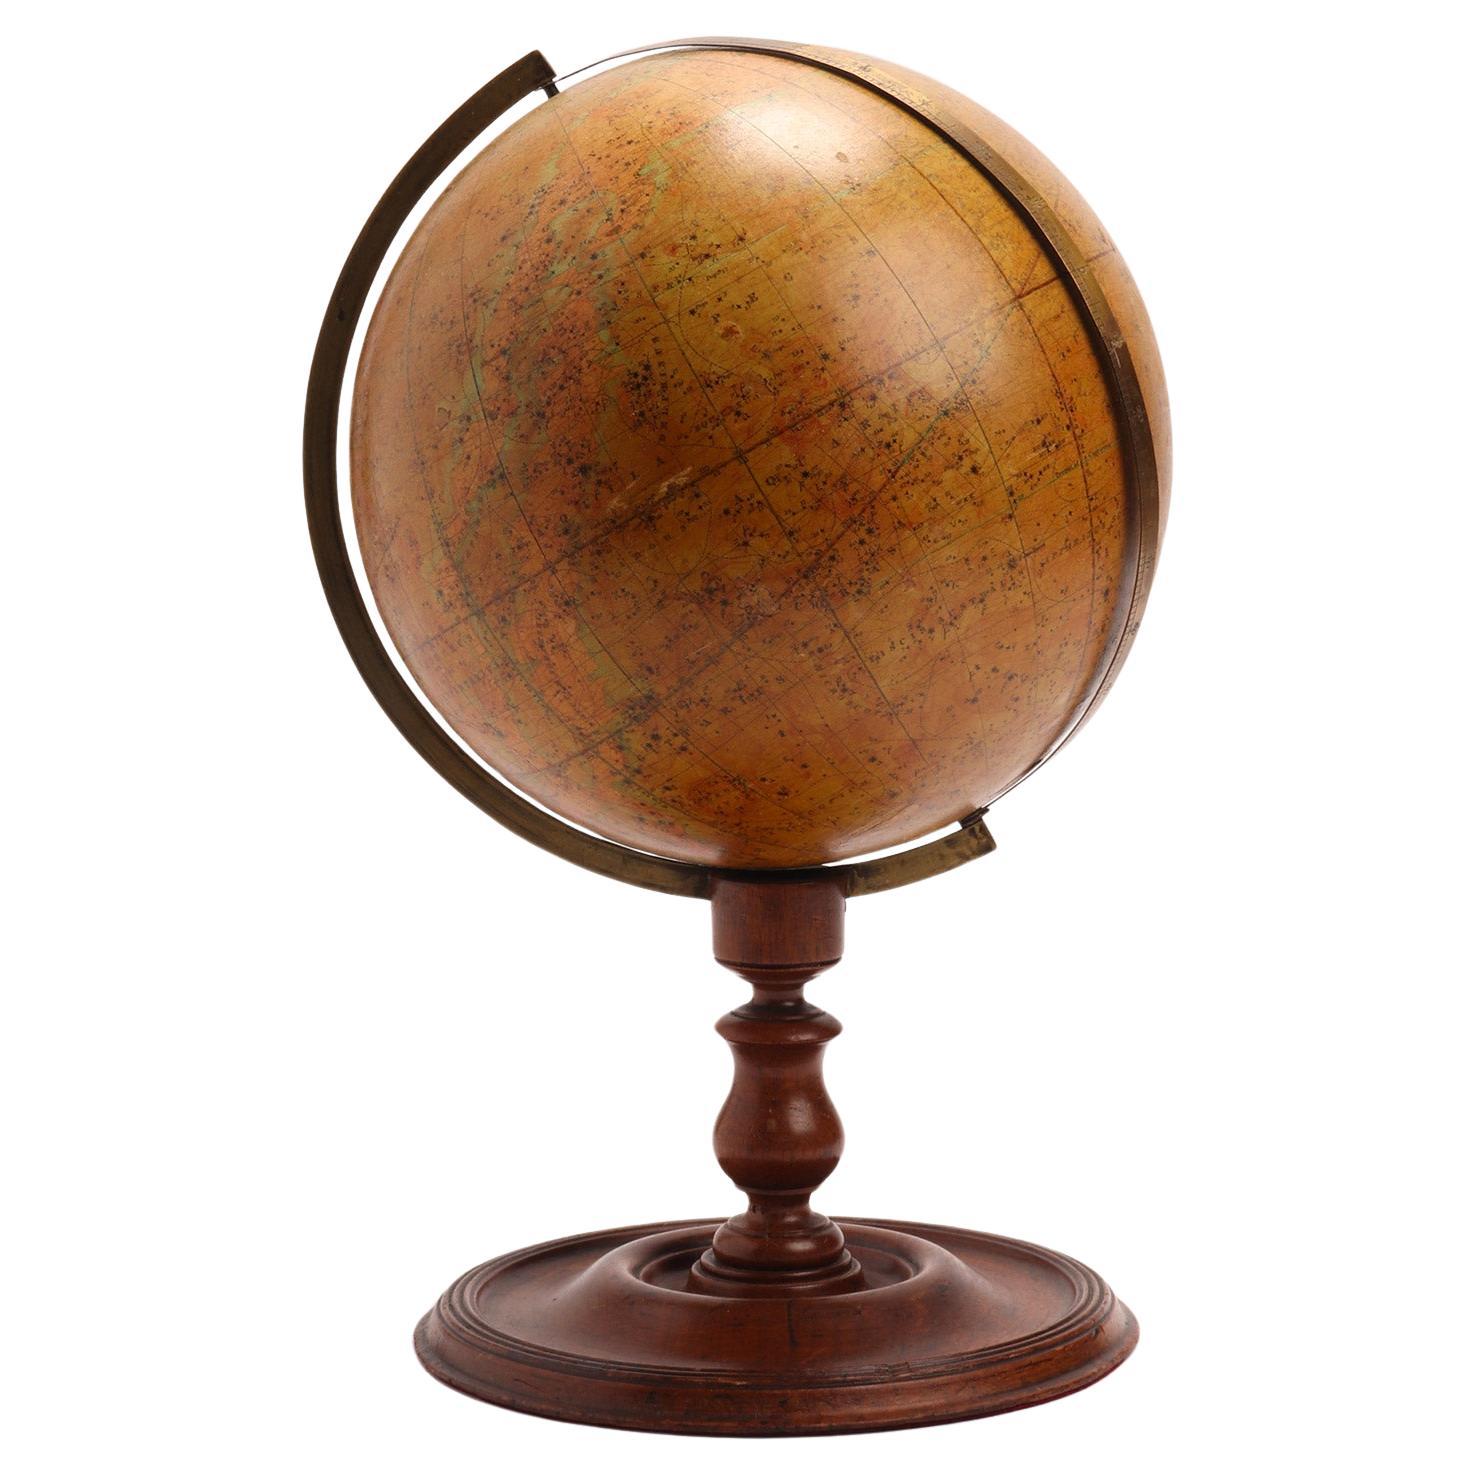 A rare celestial globe edited by J. Wyld, Charing Cross East London 1860. 